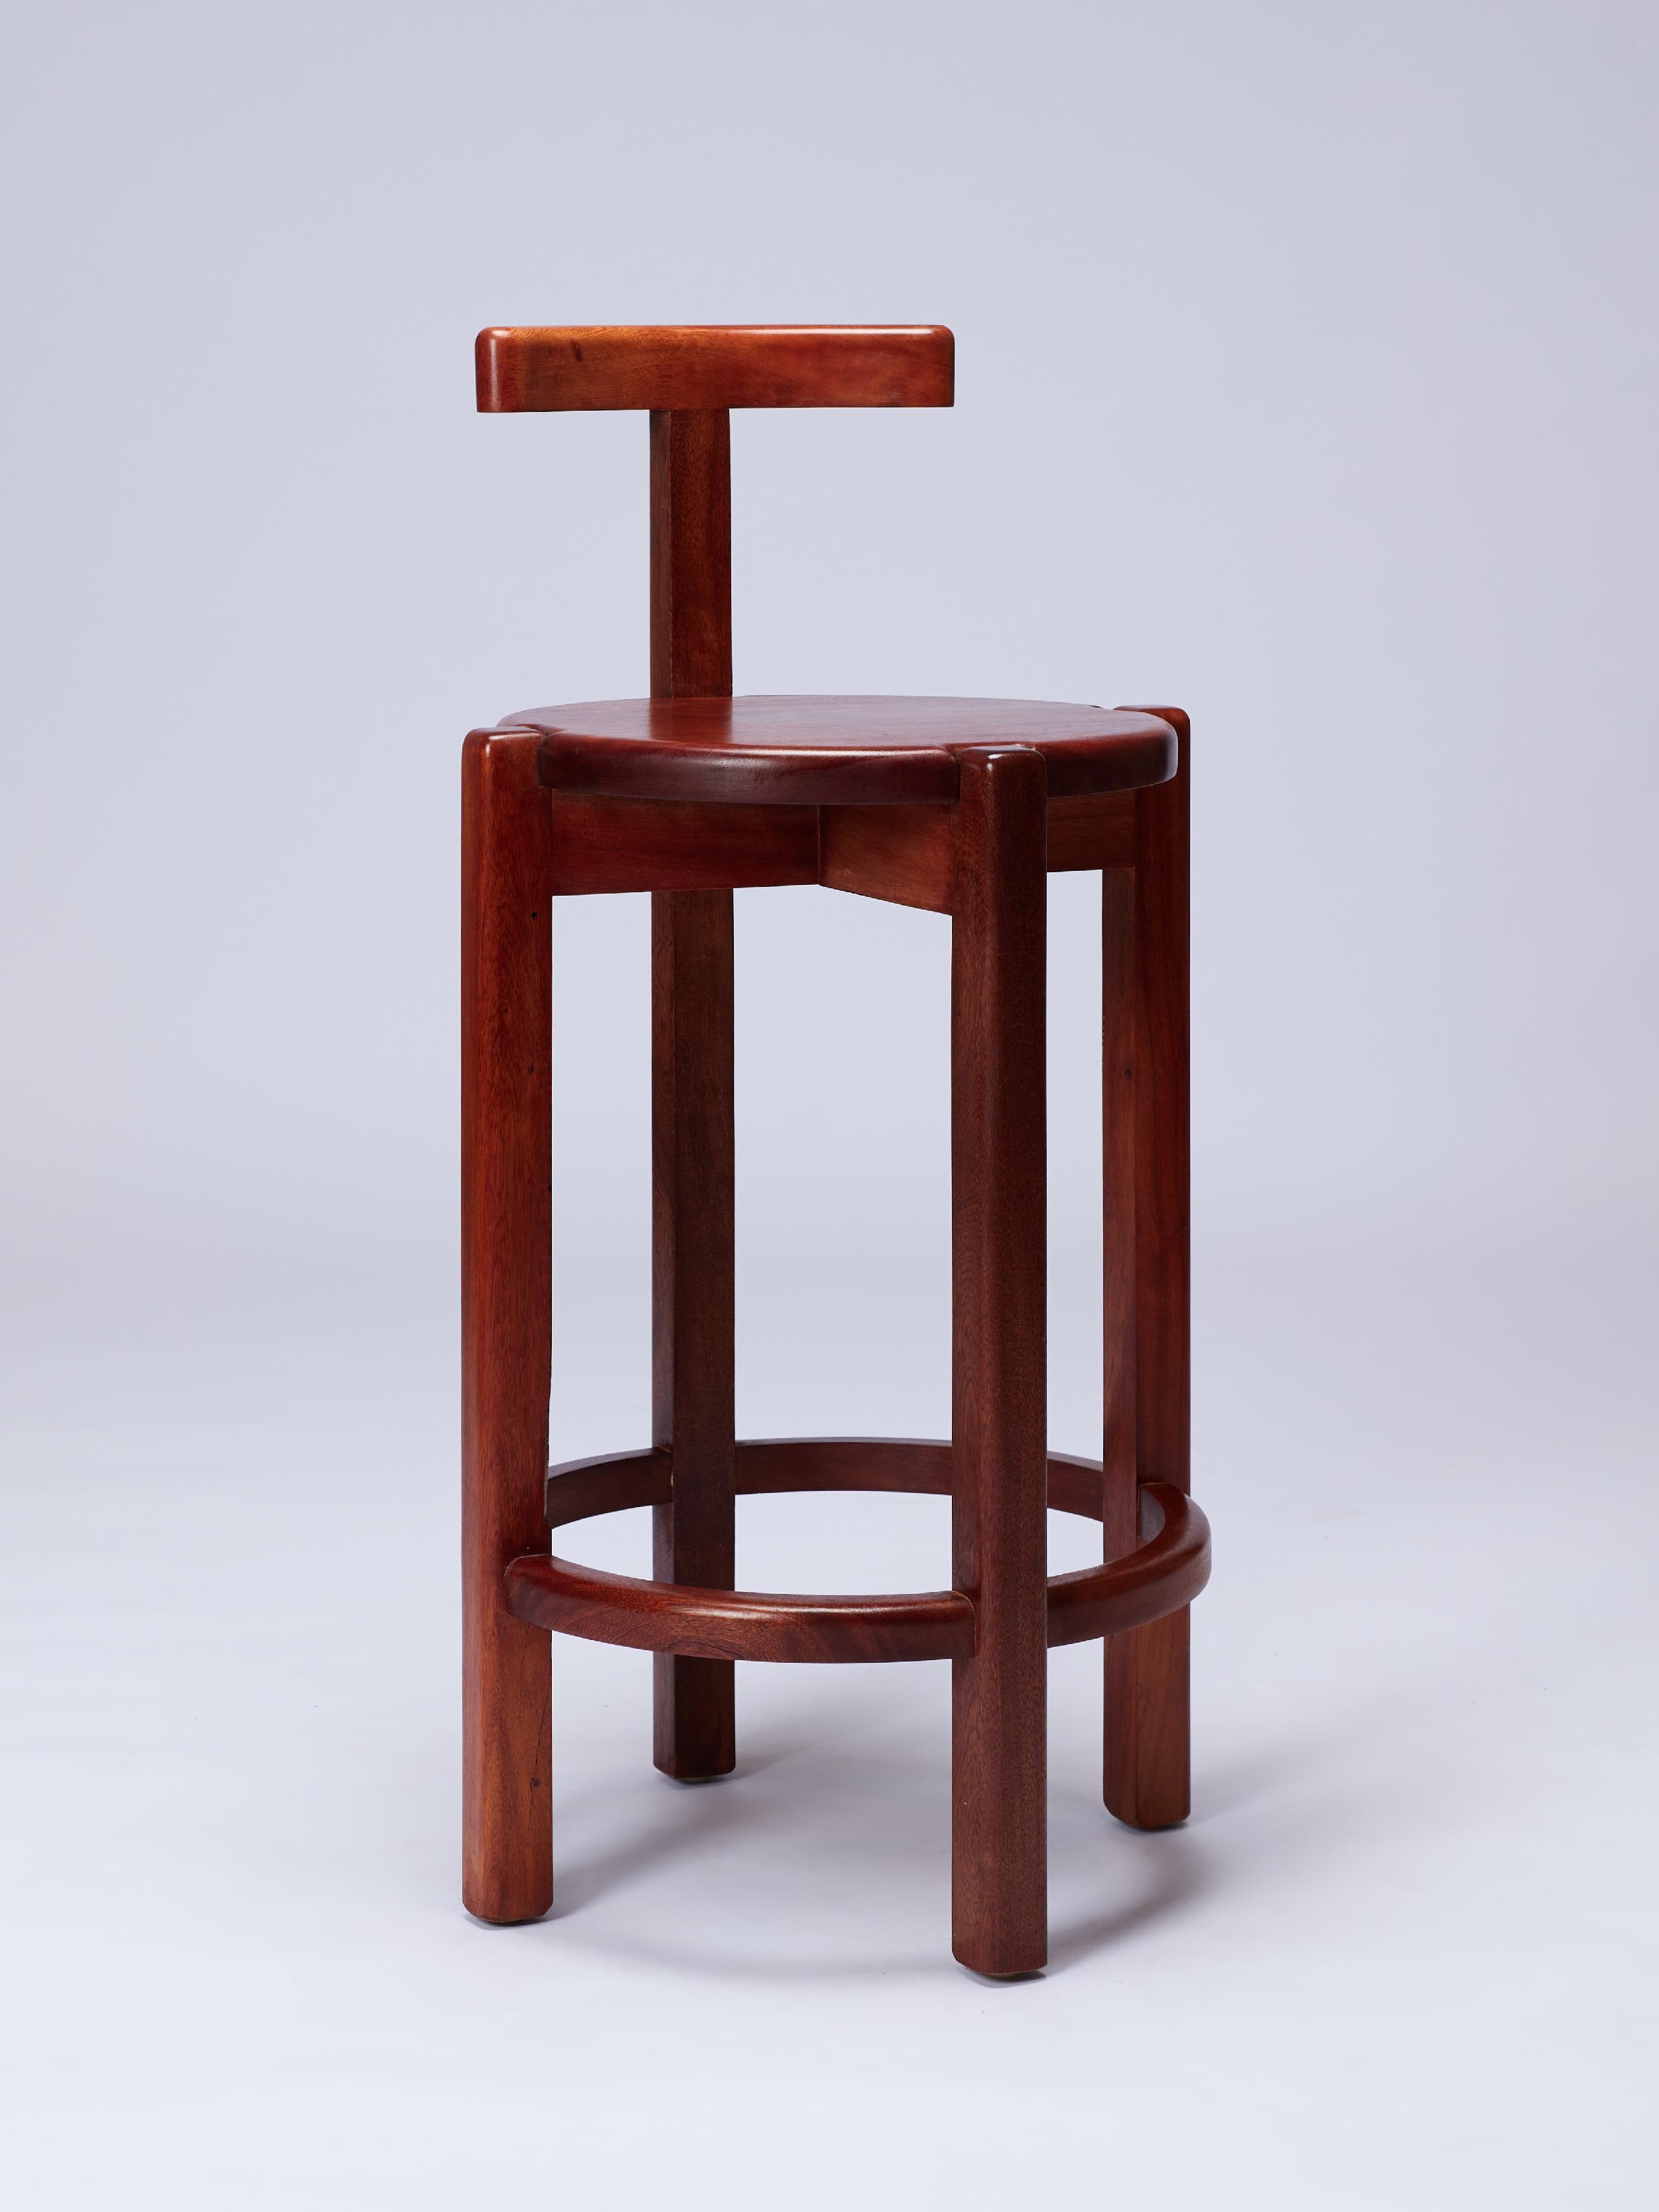 The Orno bar stool is part of the Orno collection, our first to be entirely made of hardwood. All pieces were designed under a same construction system that consists of basic structural elements –columns, beams, support planes– and whose joints are